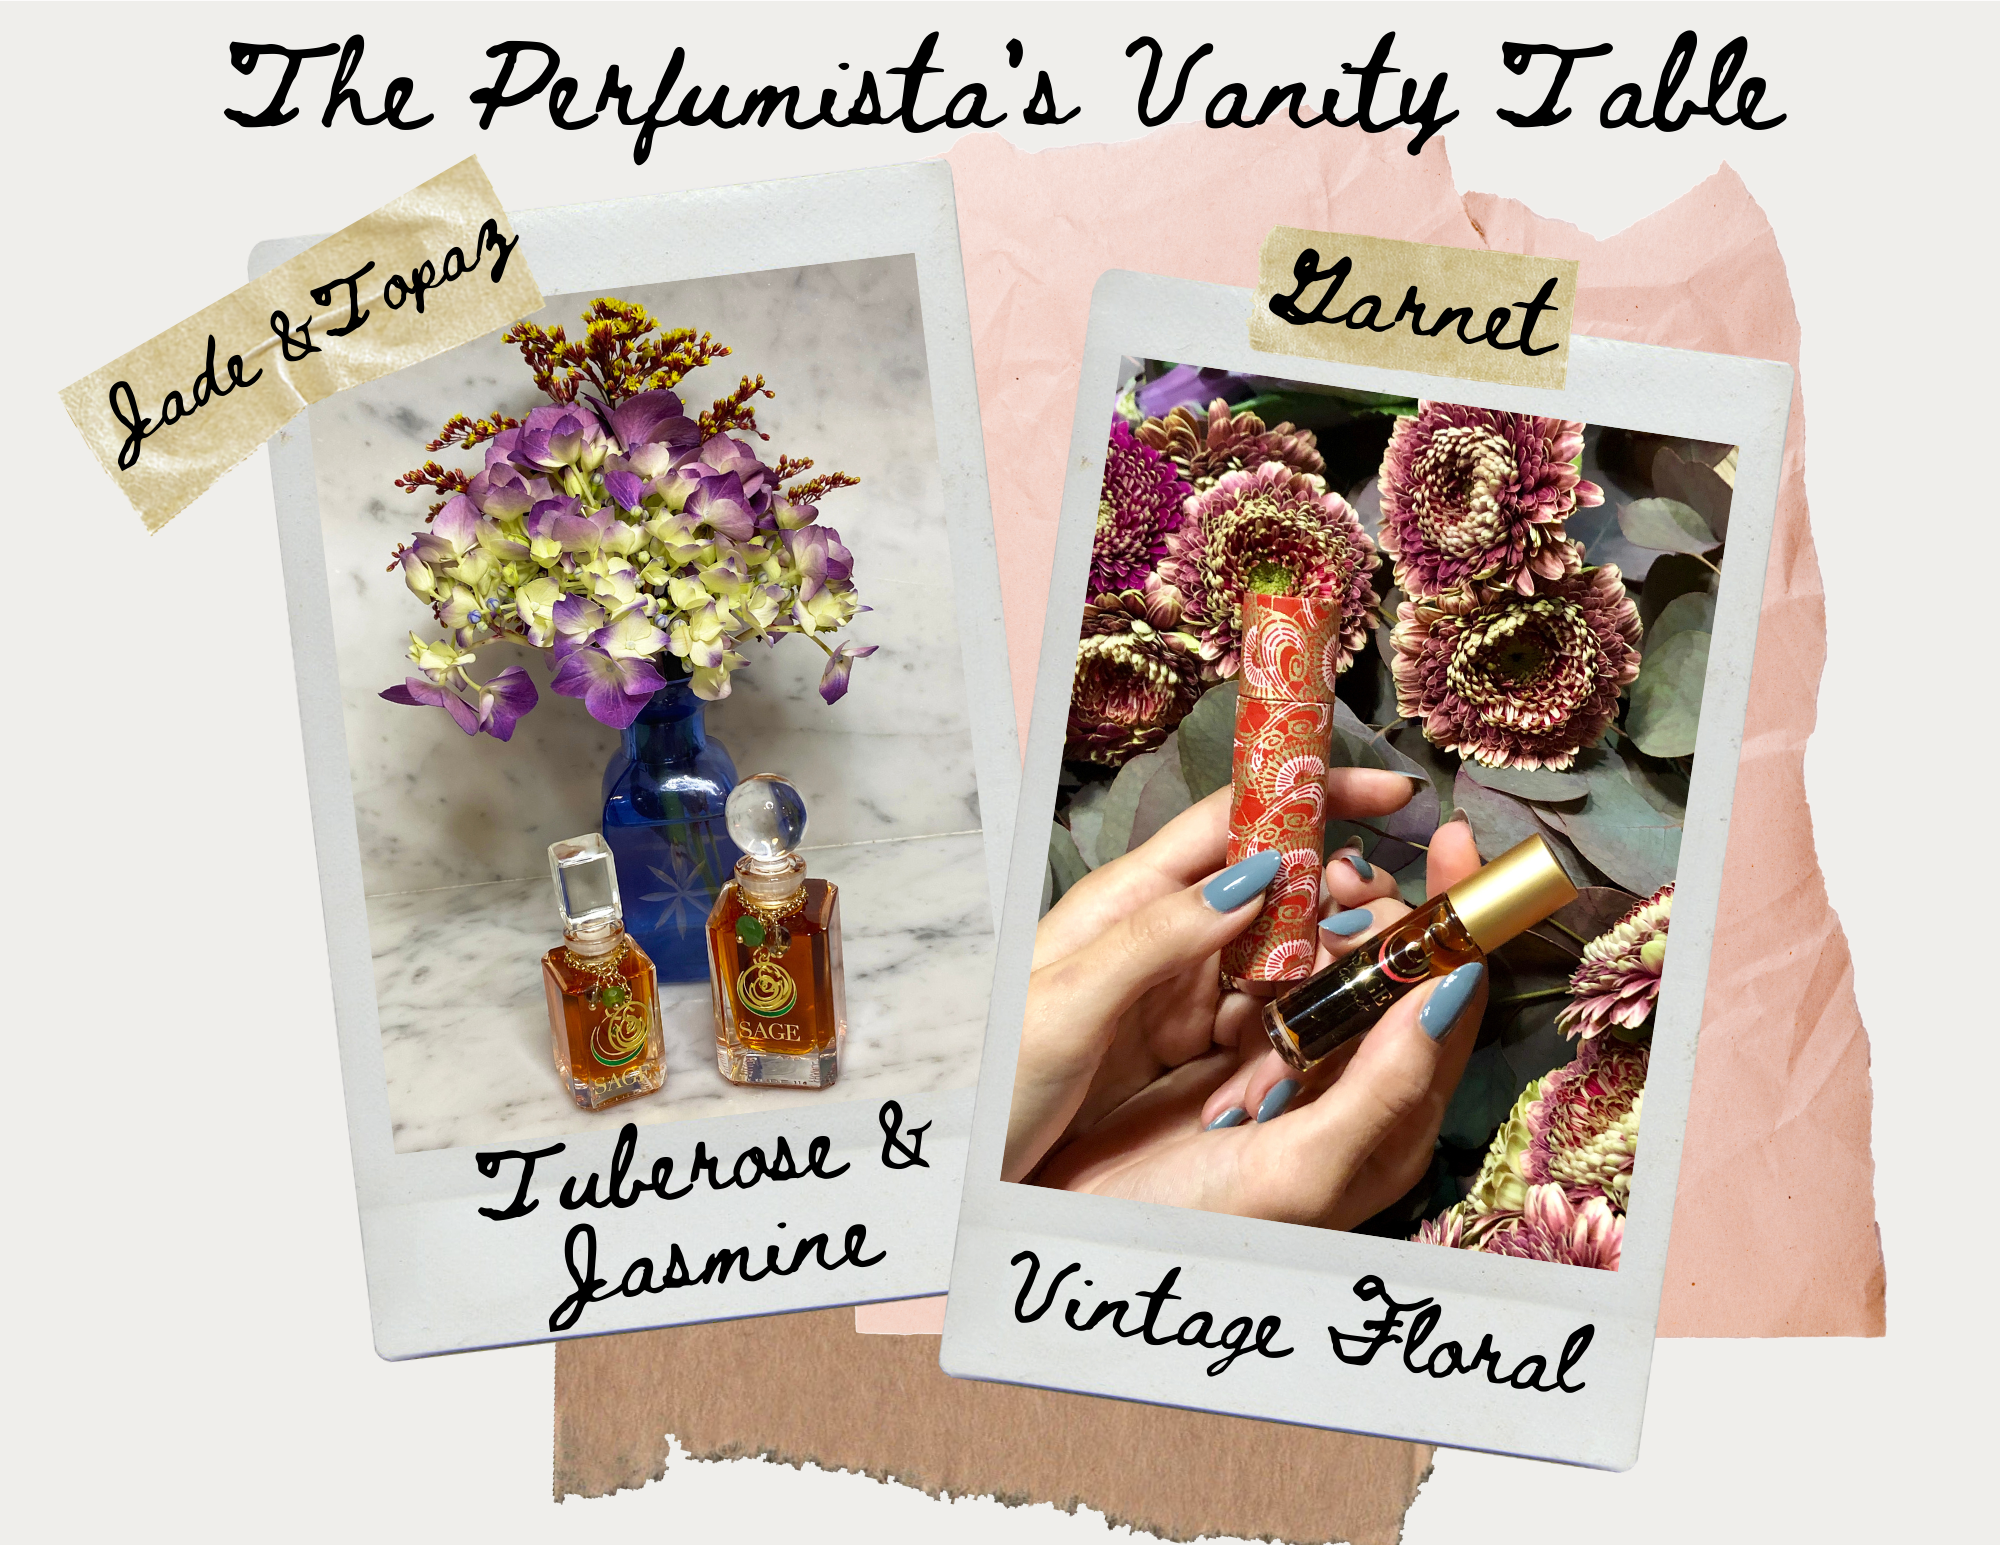 Image of jade,topaz and garnet vanity bottle with matching flower with the words the perfumistas vanity table on top then followed Tuberose and Jasmine and vintage floral on the bottom.